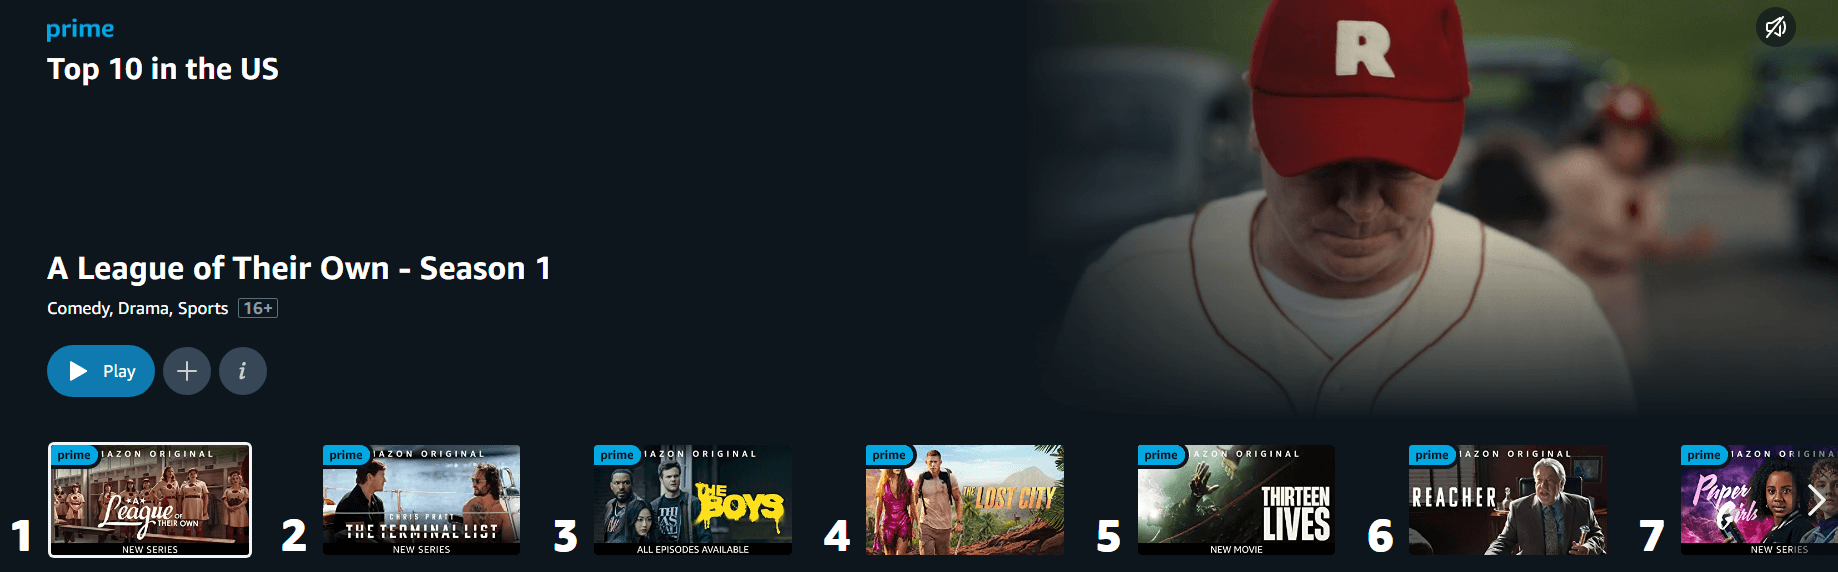 Prime Video Top 10 Feature